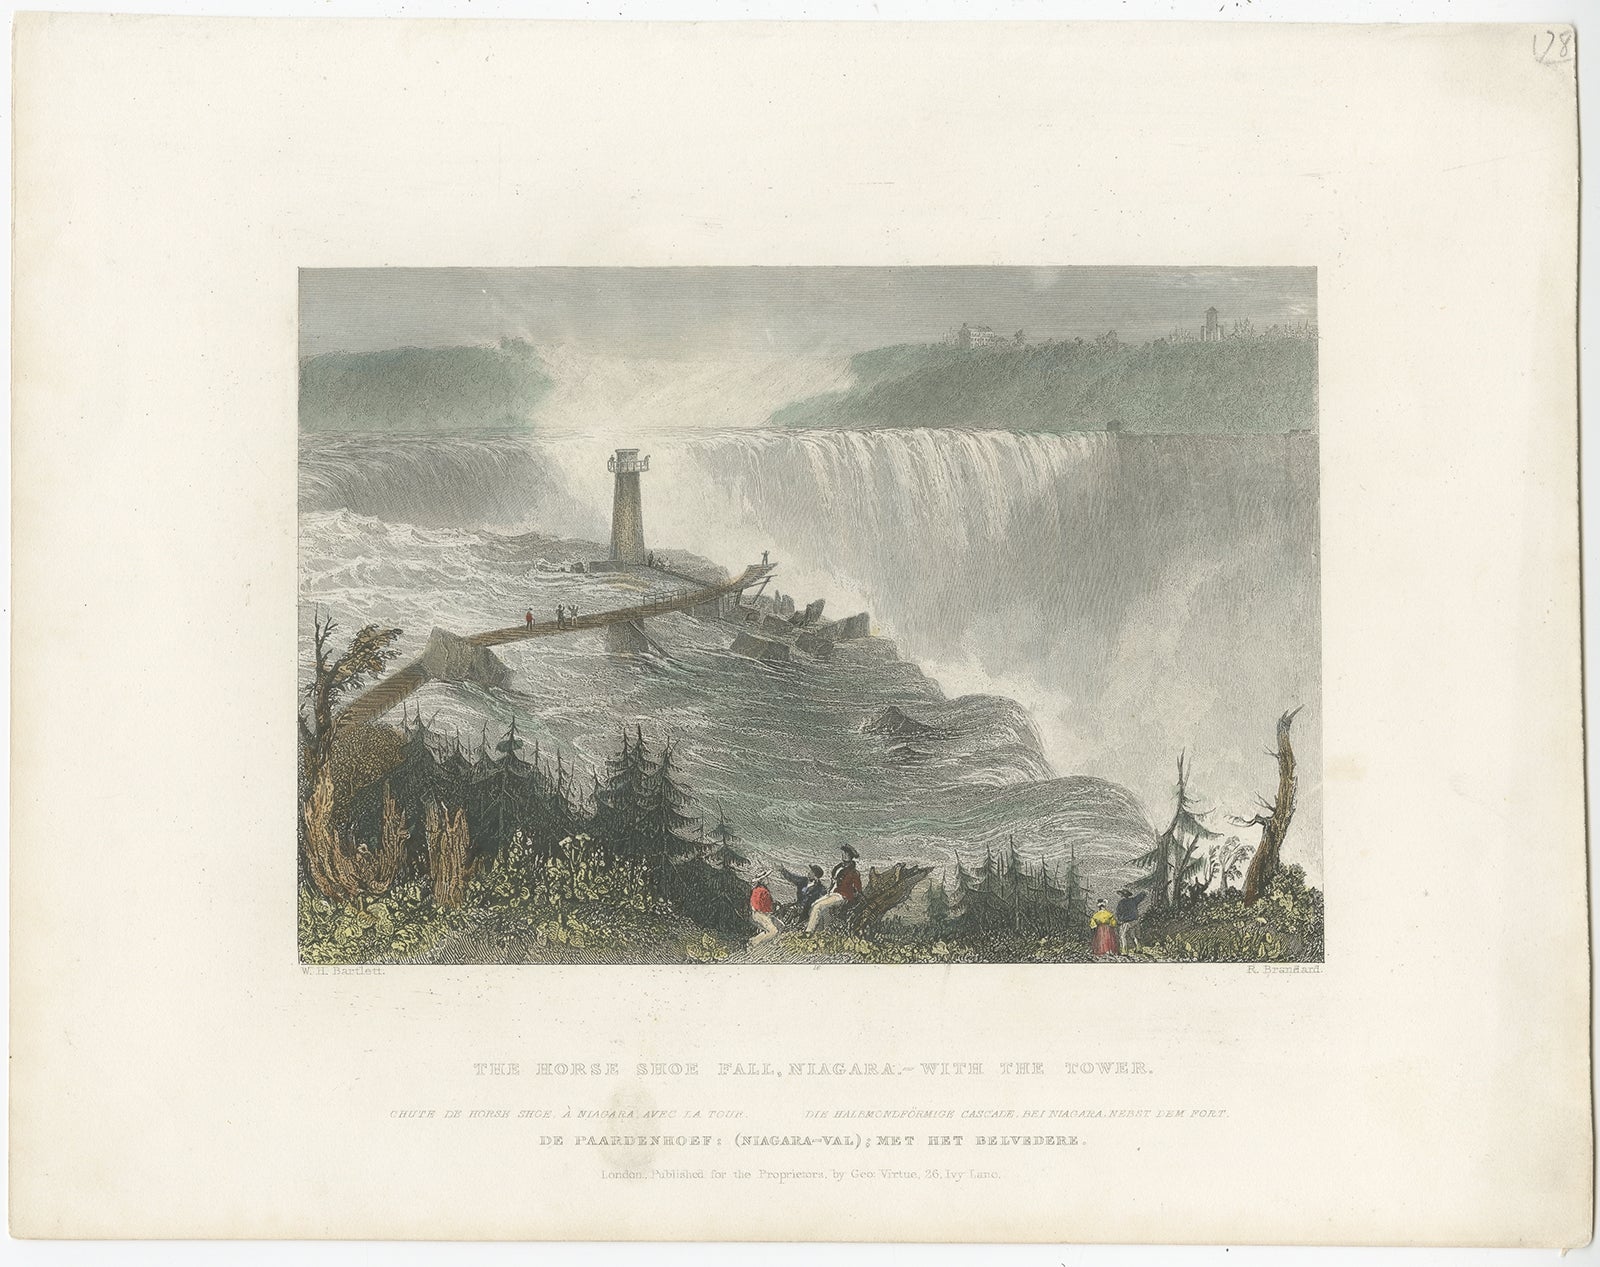 Description: Antique print titled 'The Horse shoe fall. Niagara - with the tower'. Steel engraving of the Horseshoe falls or Canadian falls.

Artists and Engravers: Engraved by R. Brandard after W.H. Bartlett. Published for the Proprietors by Geo.